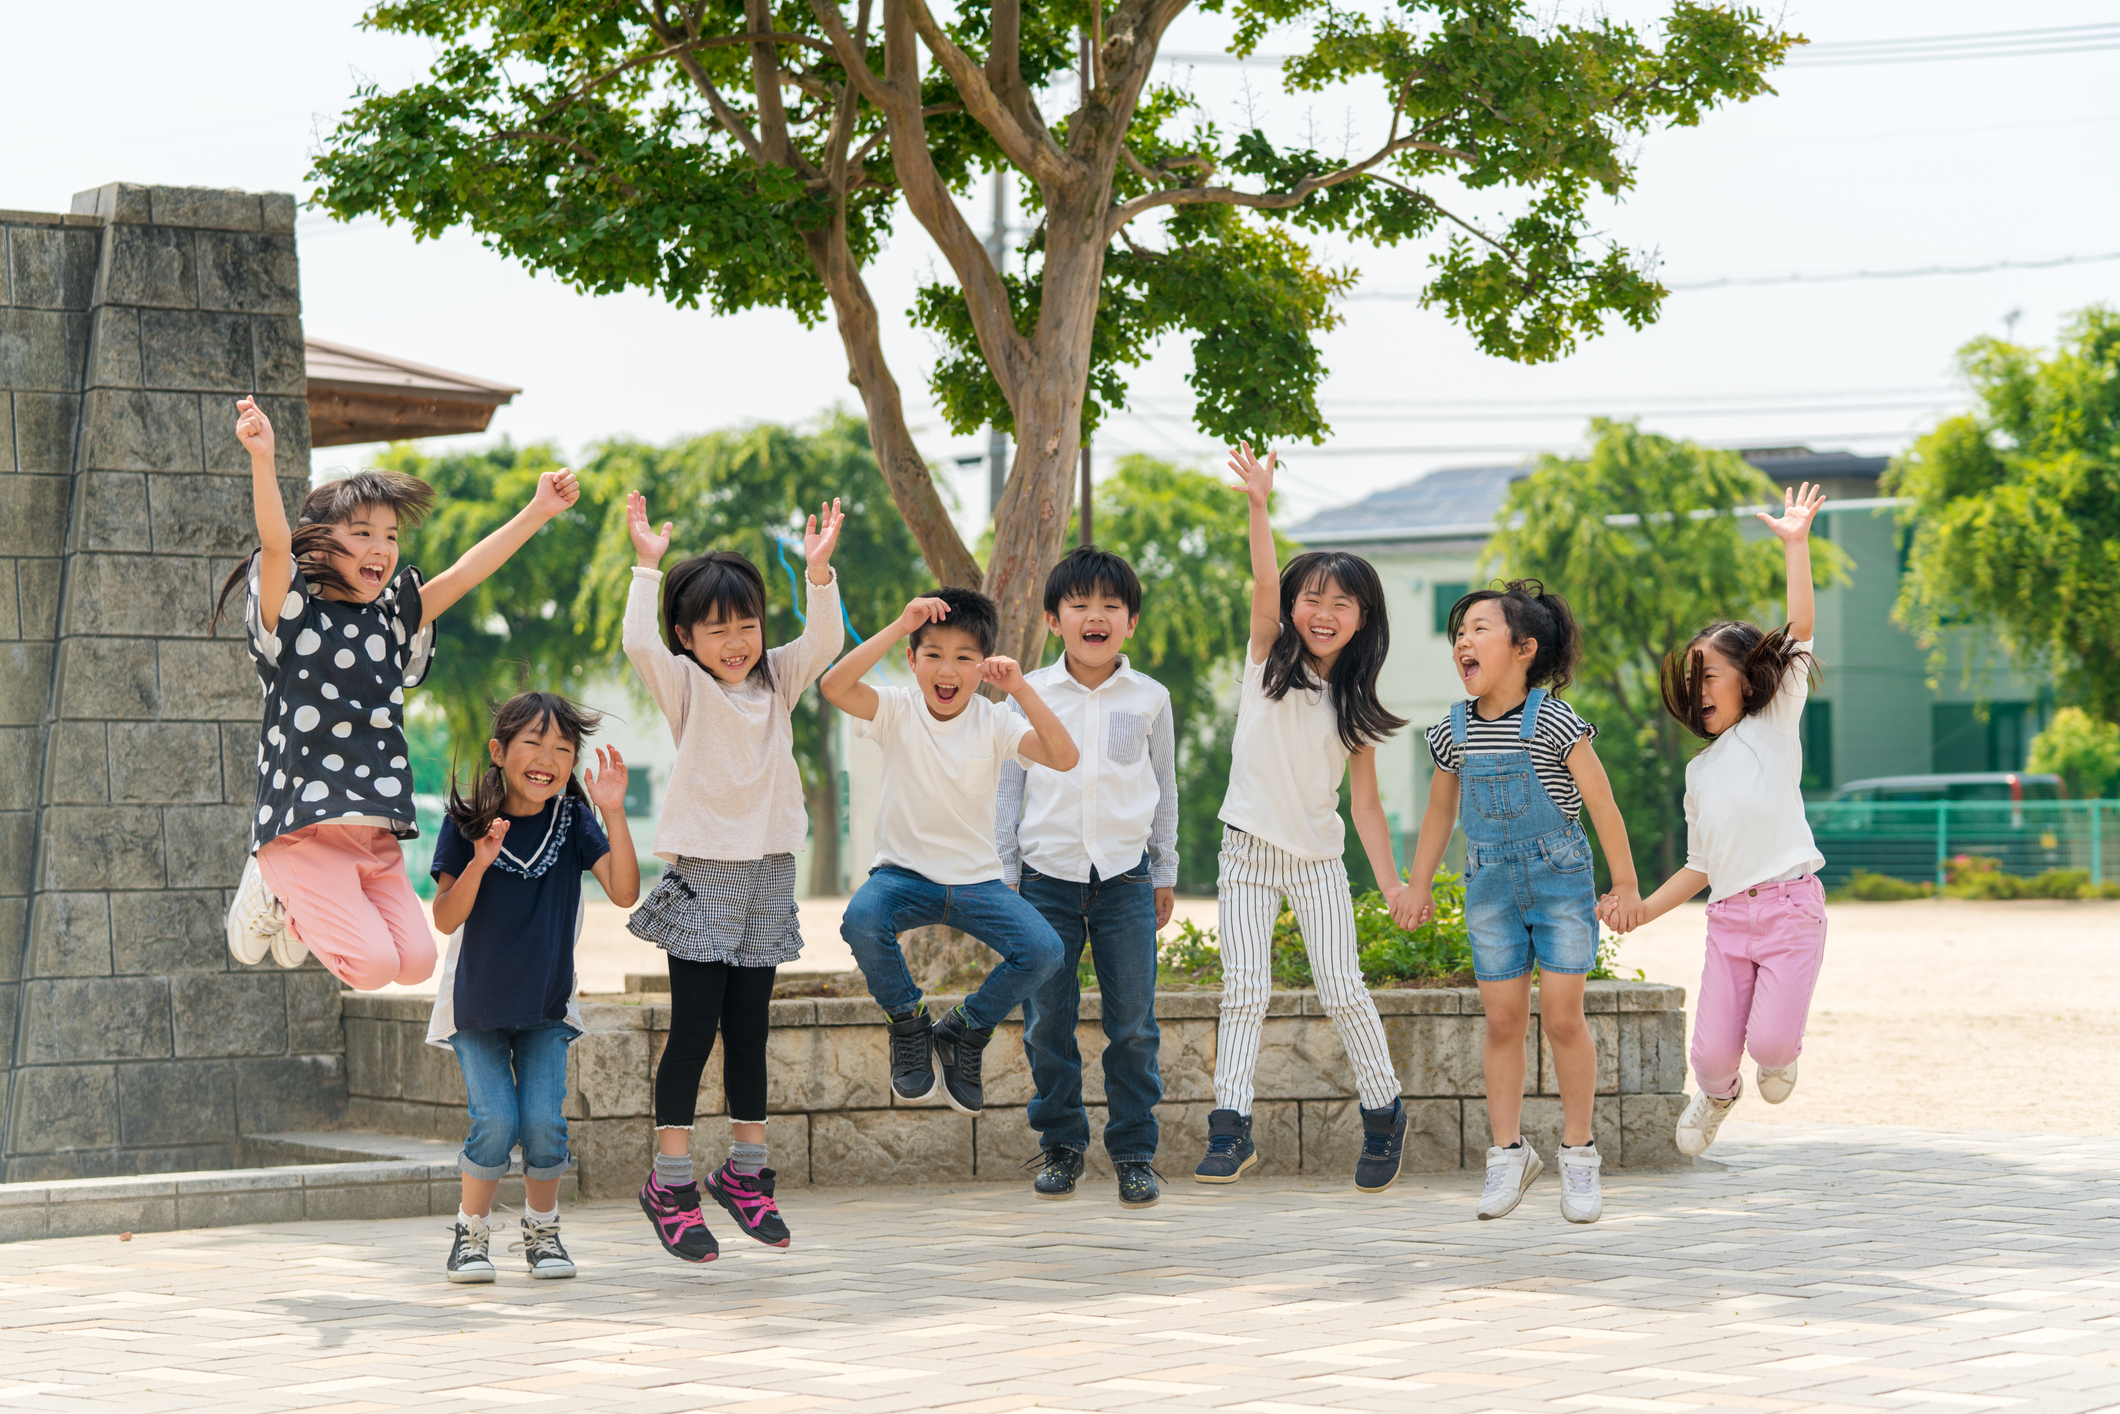 Group of children joyfully jumping in the air at a park, expressing freedom and happiness, signifying the joys of travel